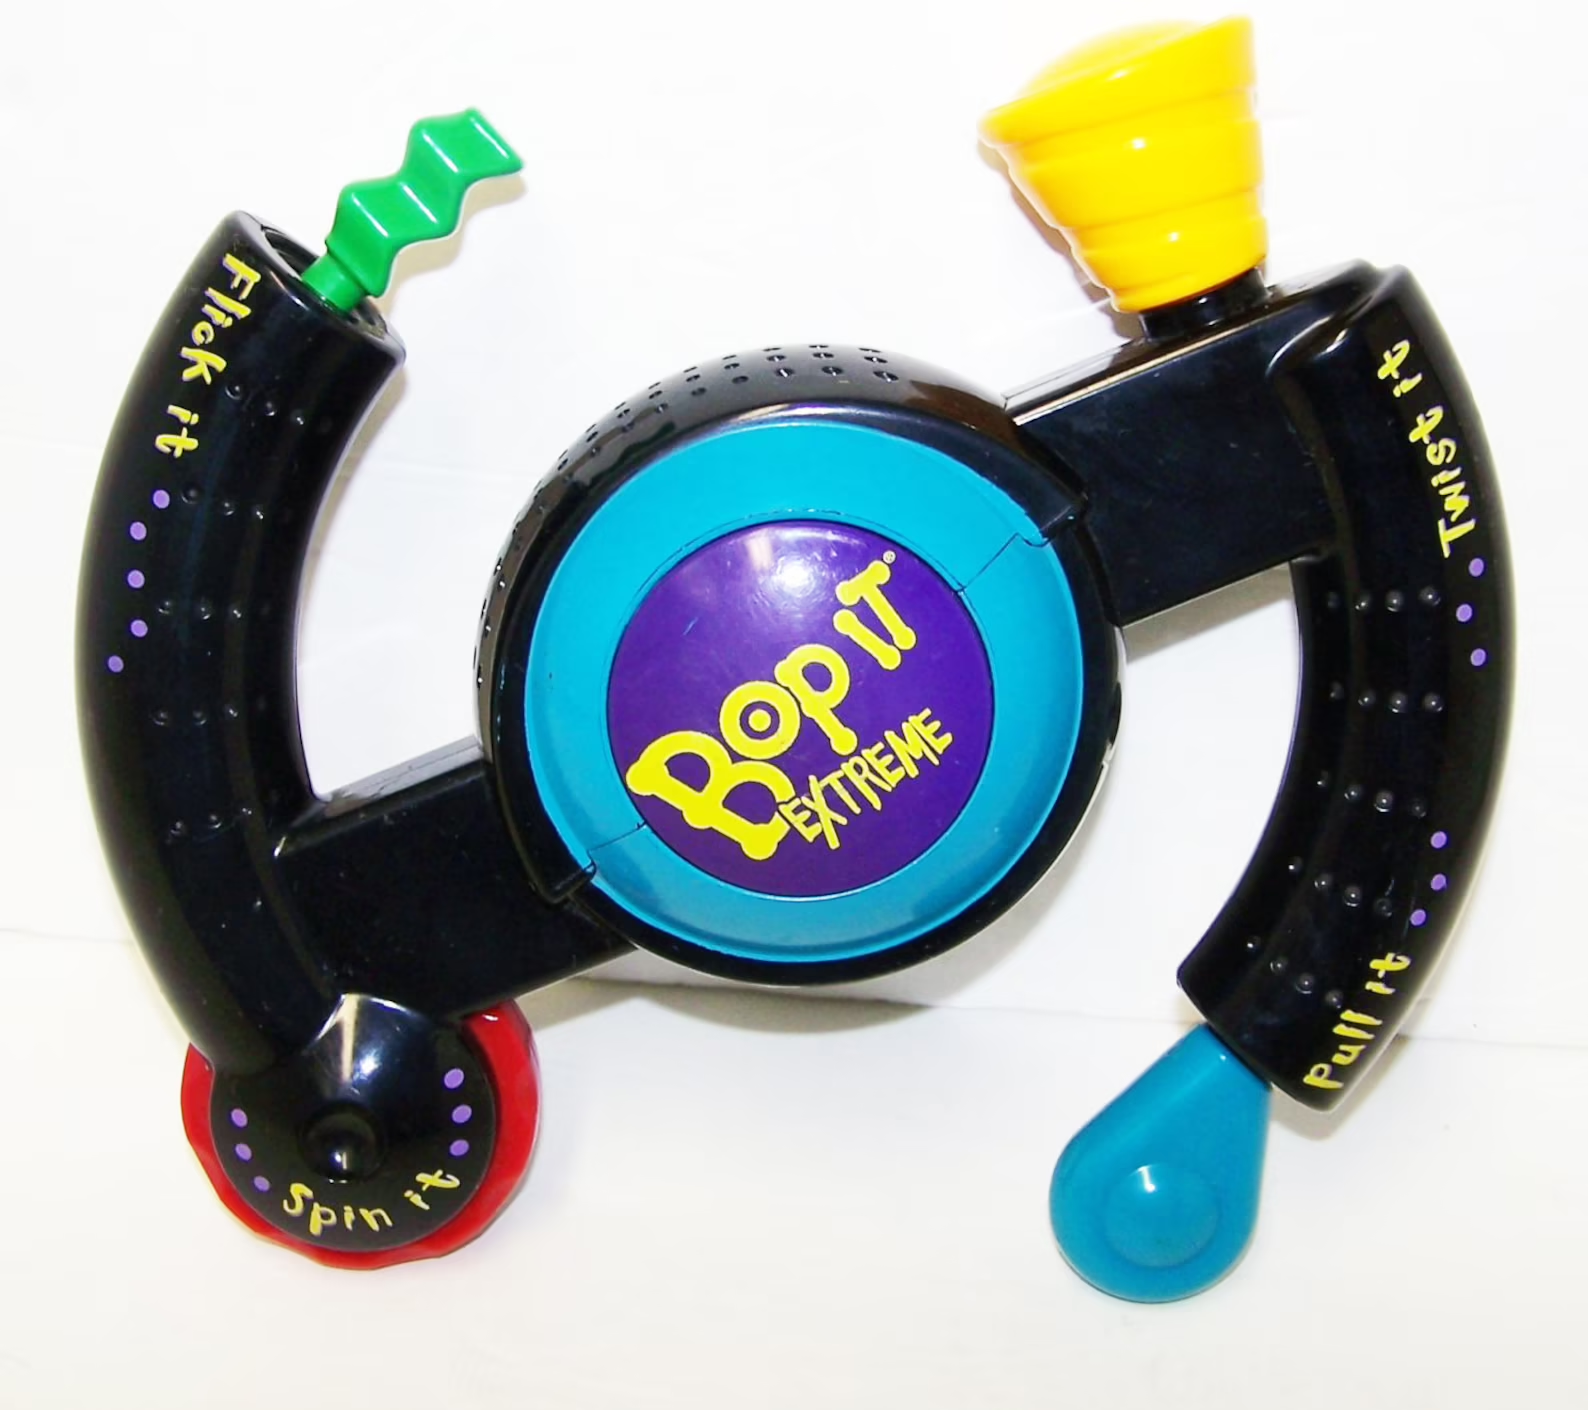 Bop It – A line of audio game